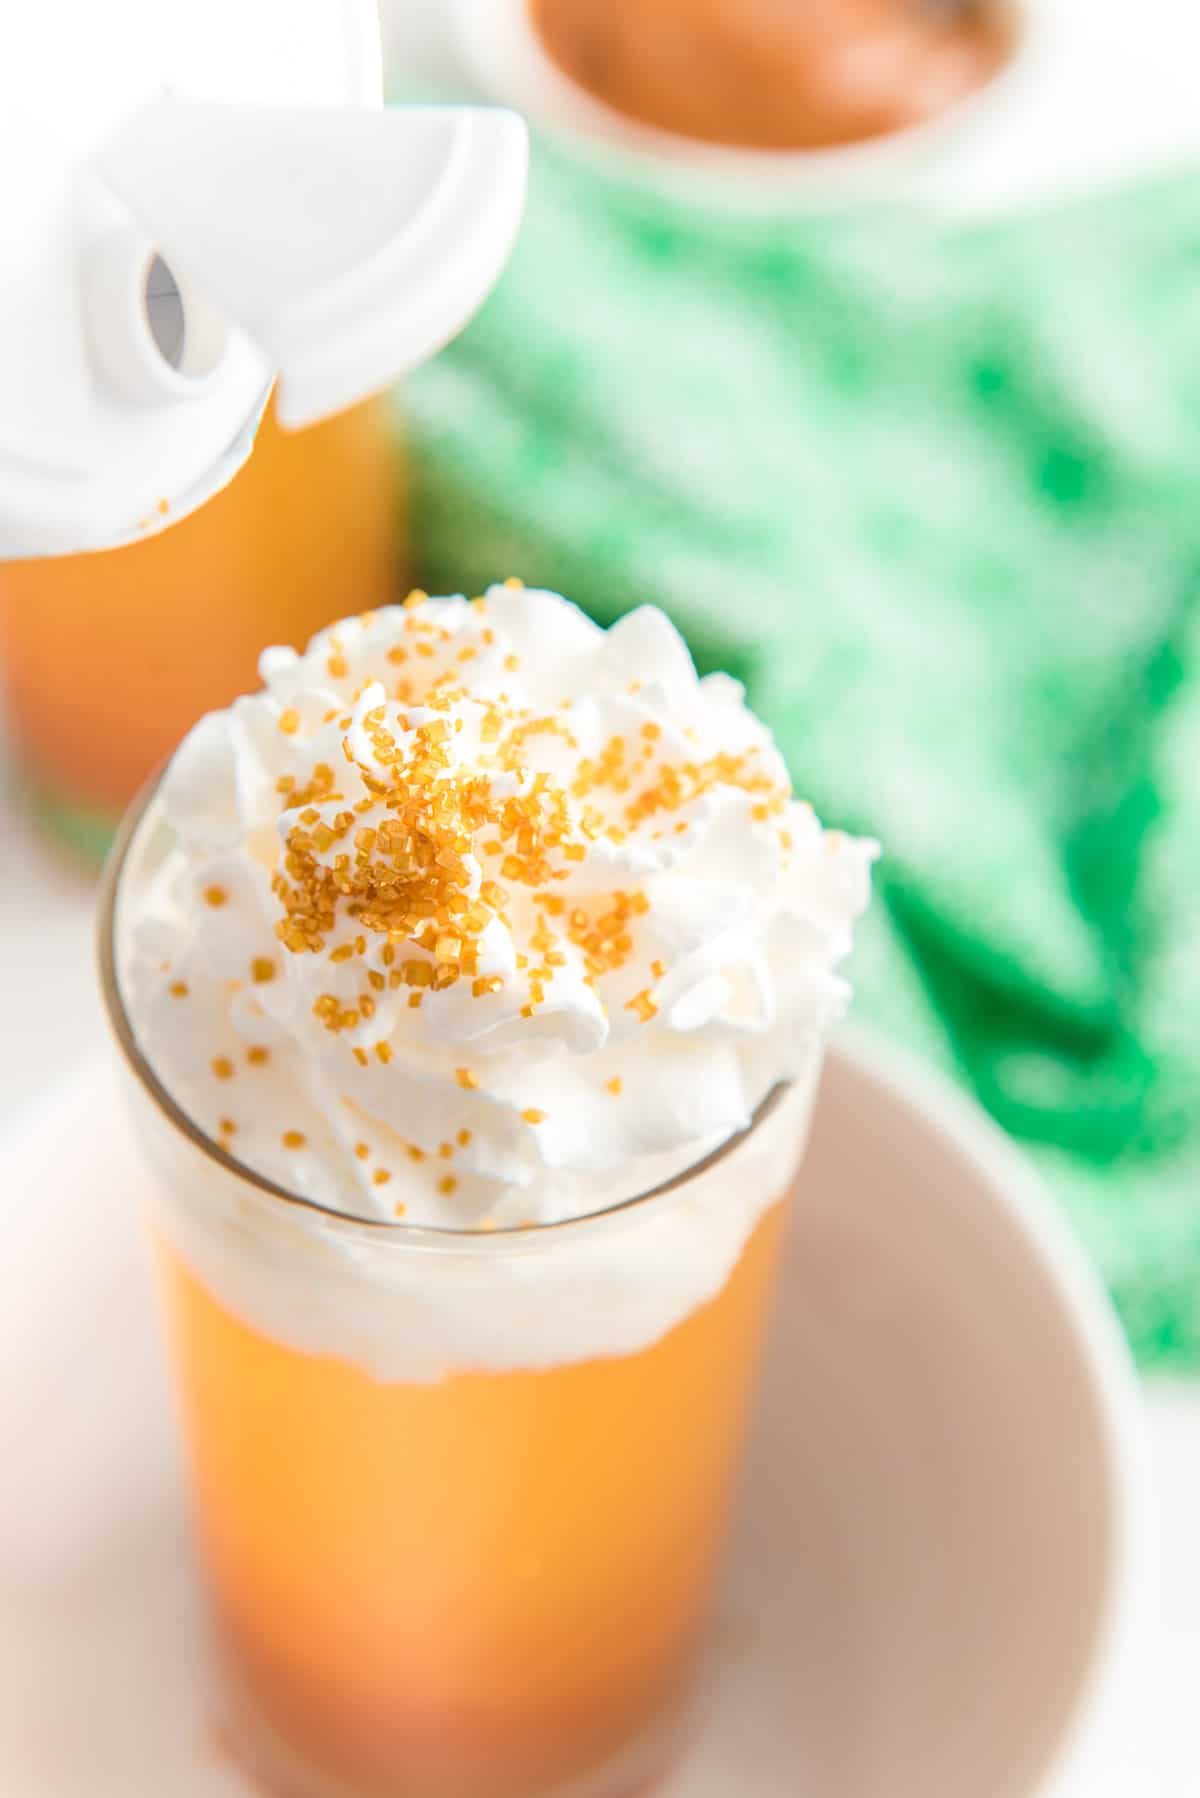 Whipped cream and sprinkles on top of a caramel apple drink